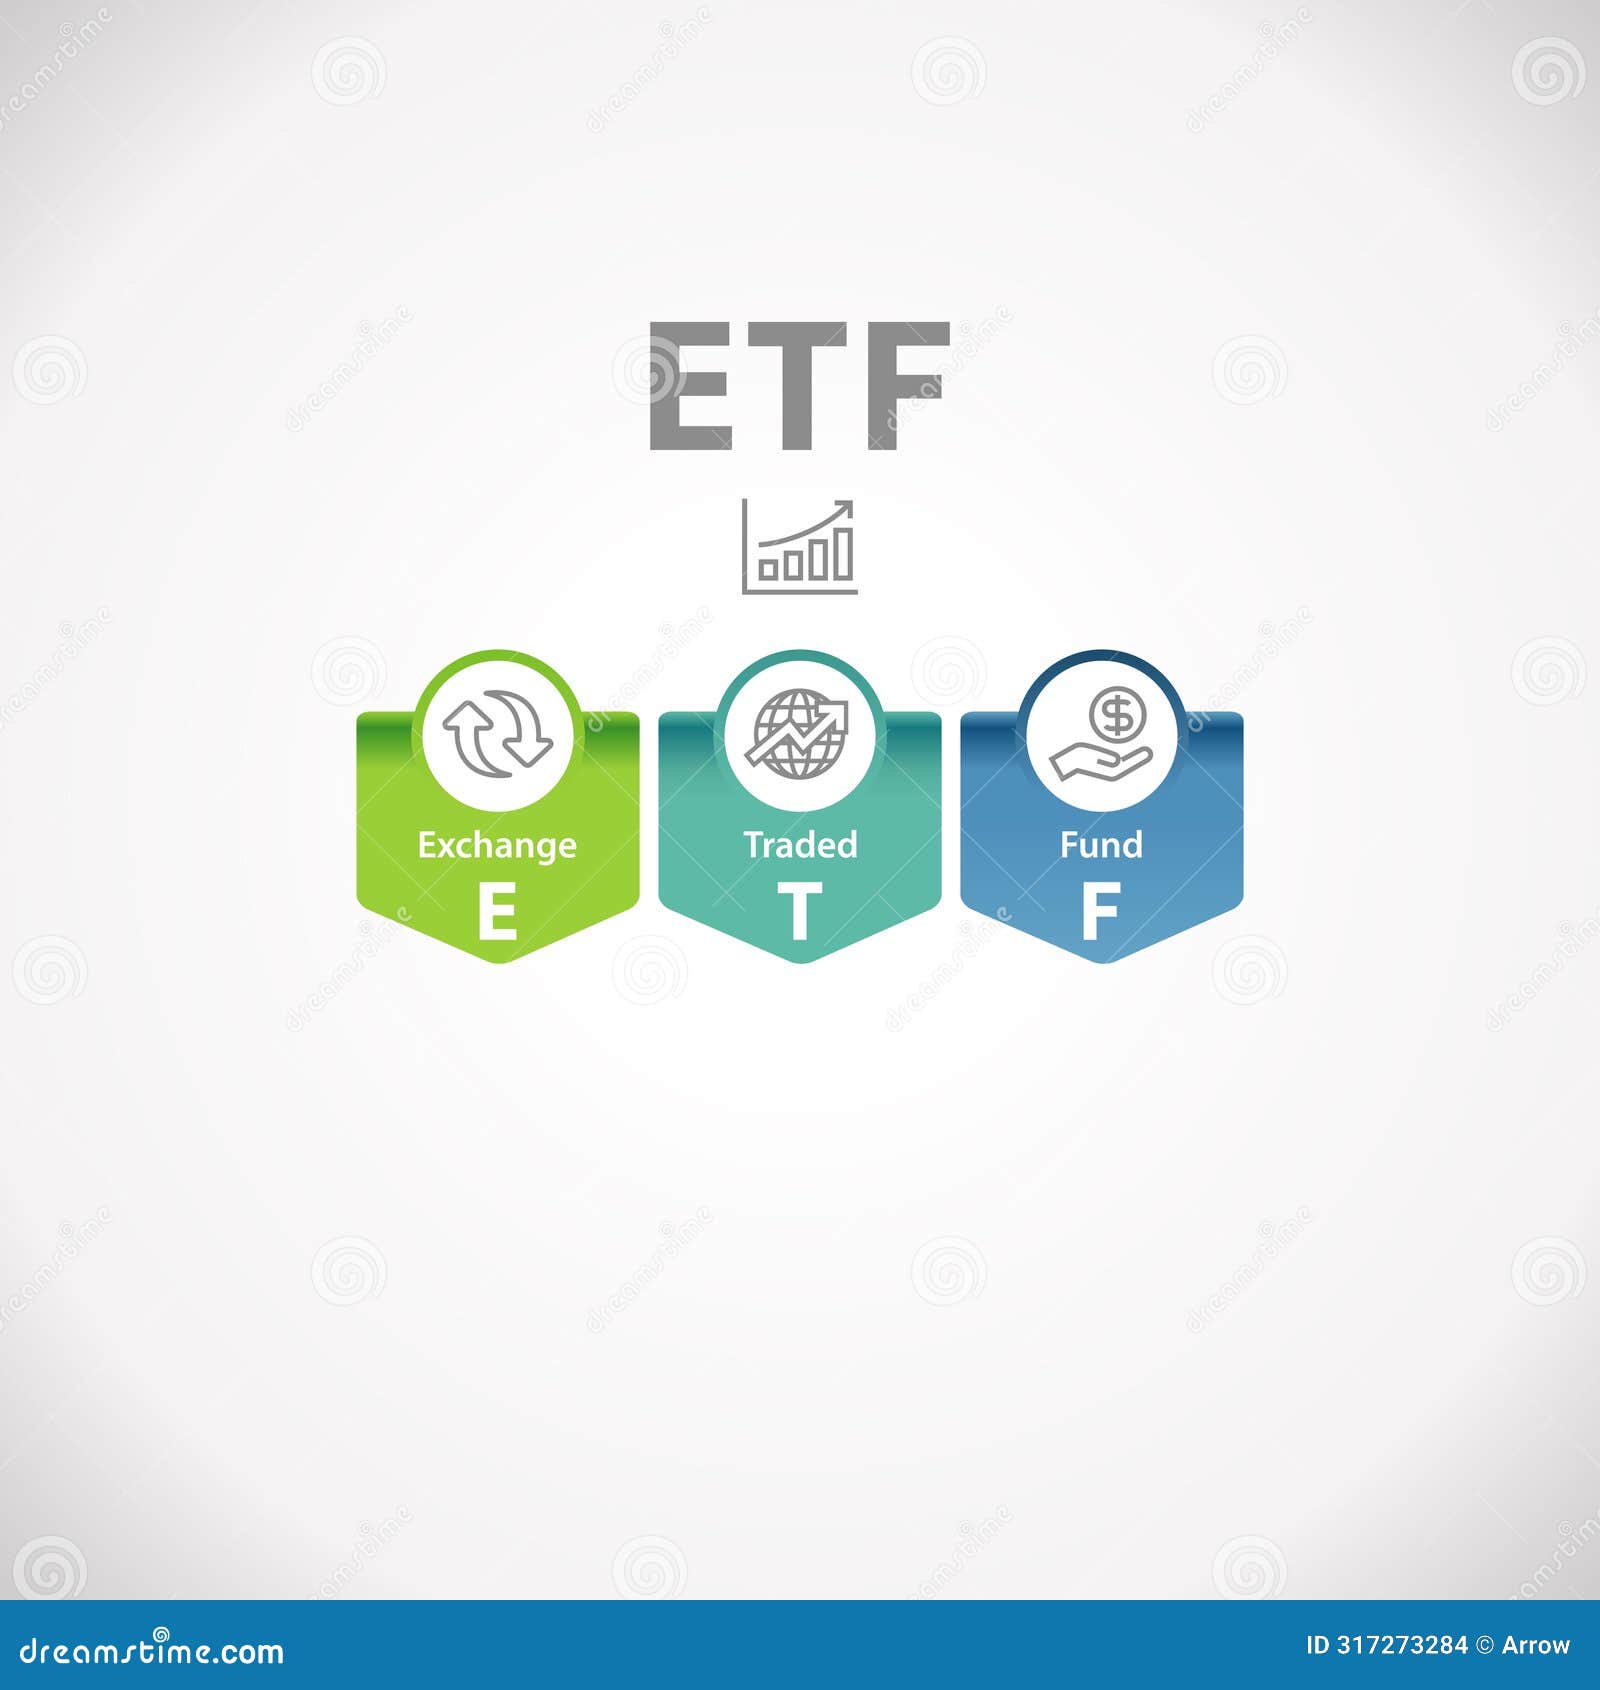 etf exchange traded fund investment icon  infographic